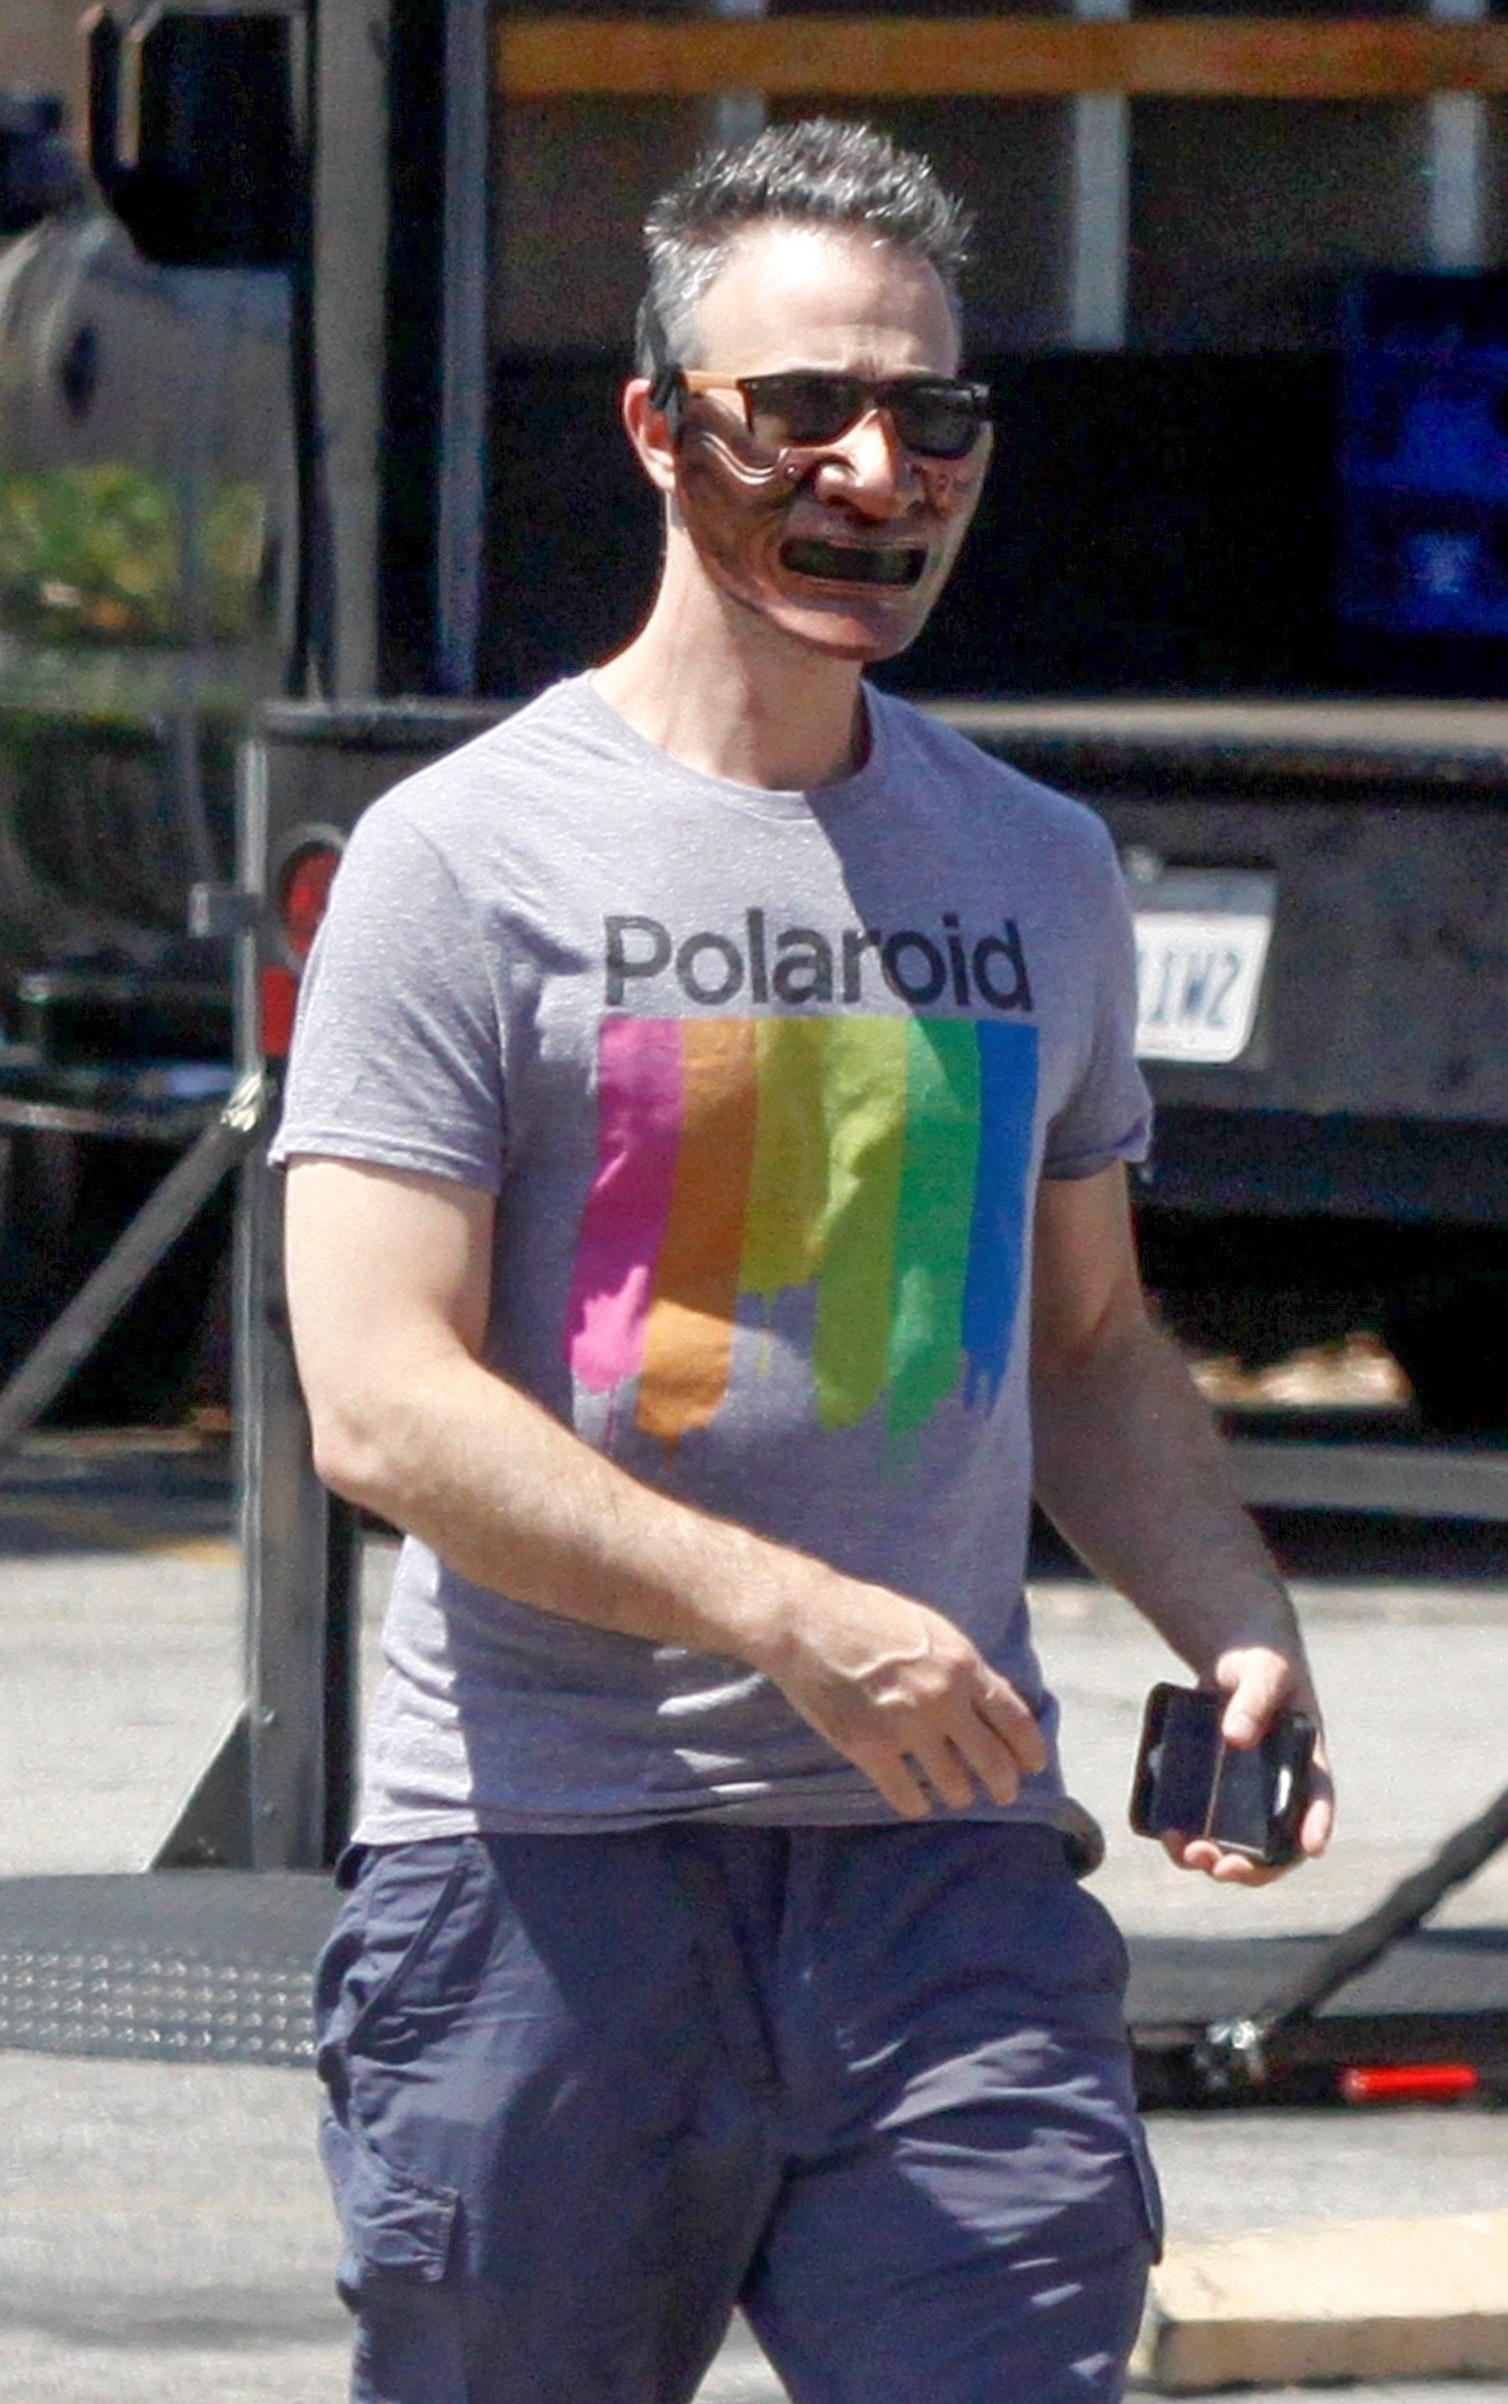 Freddie Prinze Jr. walks with a mask on that looks like half of an iron man costume.